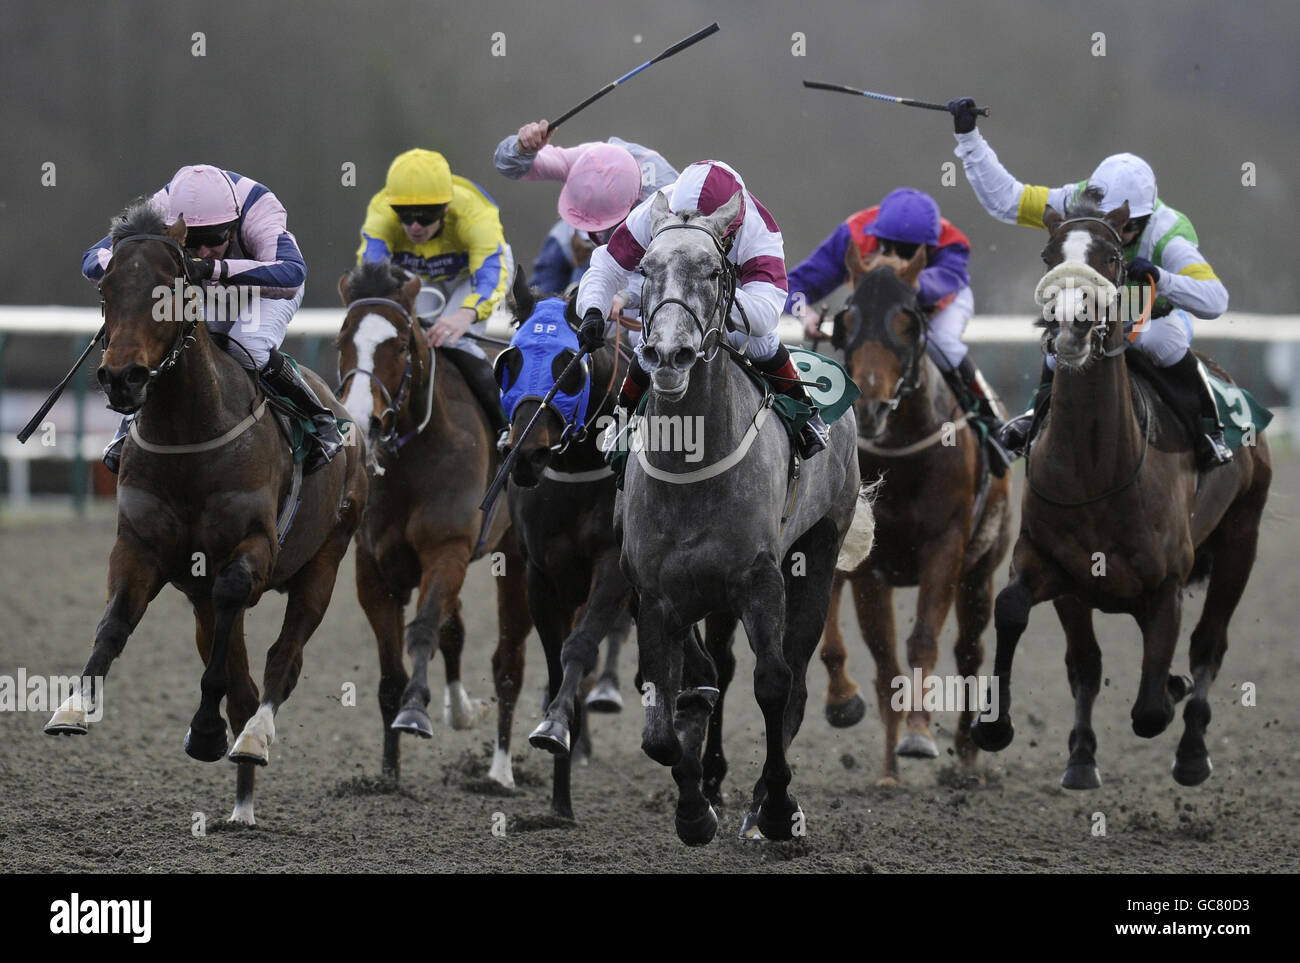 Tanley and Jimmy Quinn (grey horse, centre) win The Bet Test Match Cricket - Betdaq Handicap Stakes at Lingfield Racecourse, Lingfield. Stock Photo